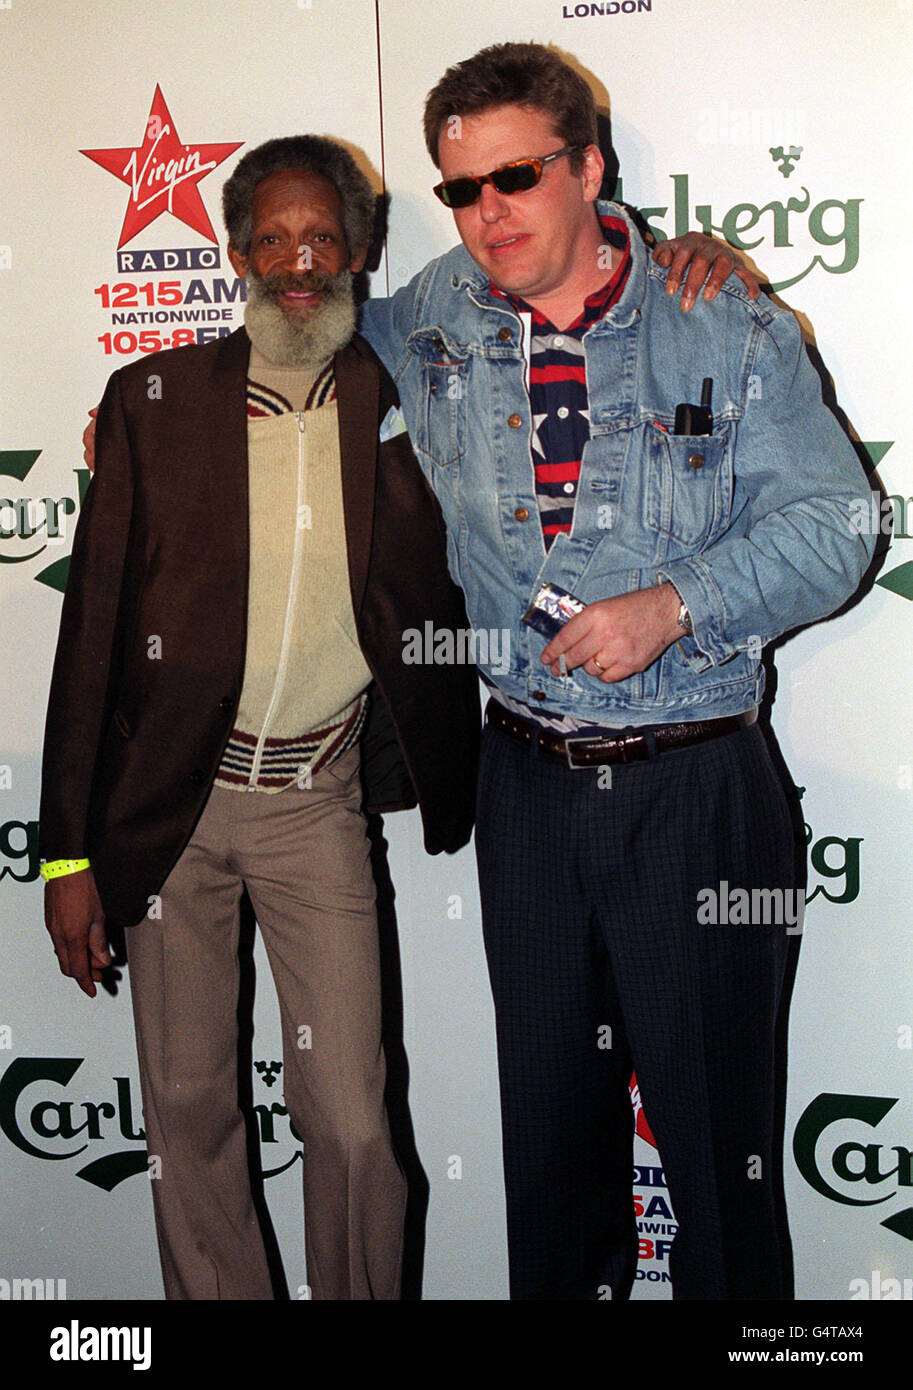 Cedric (left), a regular guest on television's TFI Friday, and Suggs, of the pop group Madness, attending the Virgin Radio/Carlsberg Pre-Christmas party, at Chelsea Bridge Wharf, London. Stock Photo